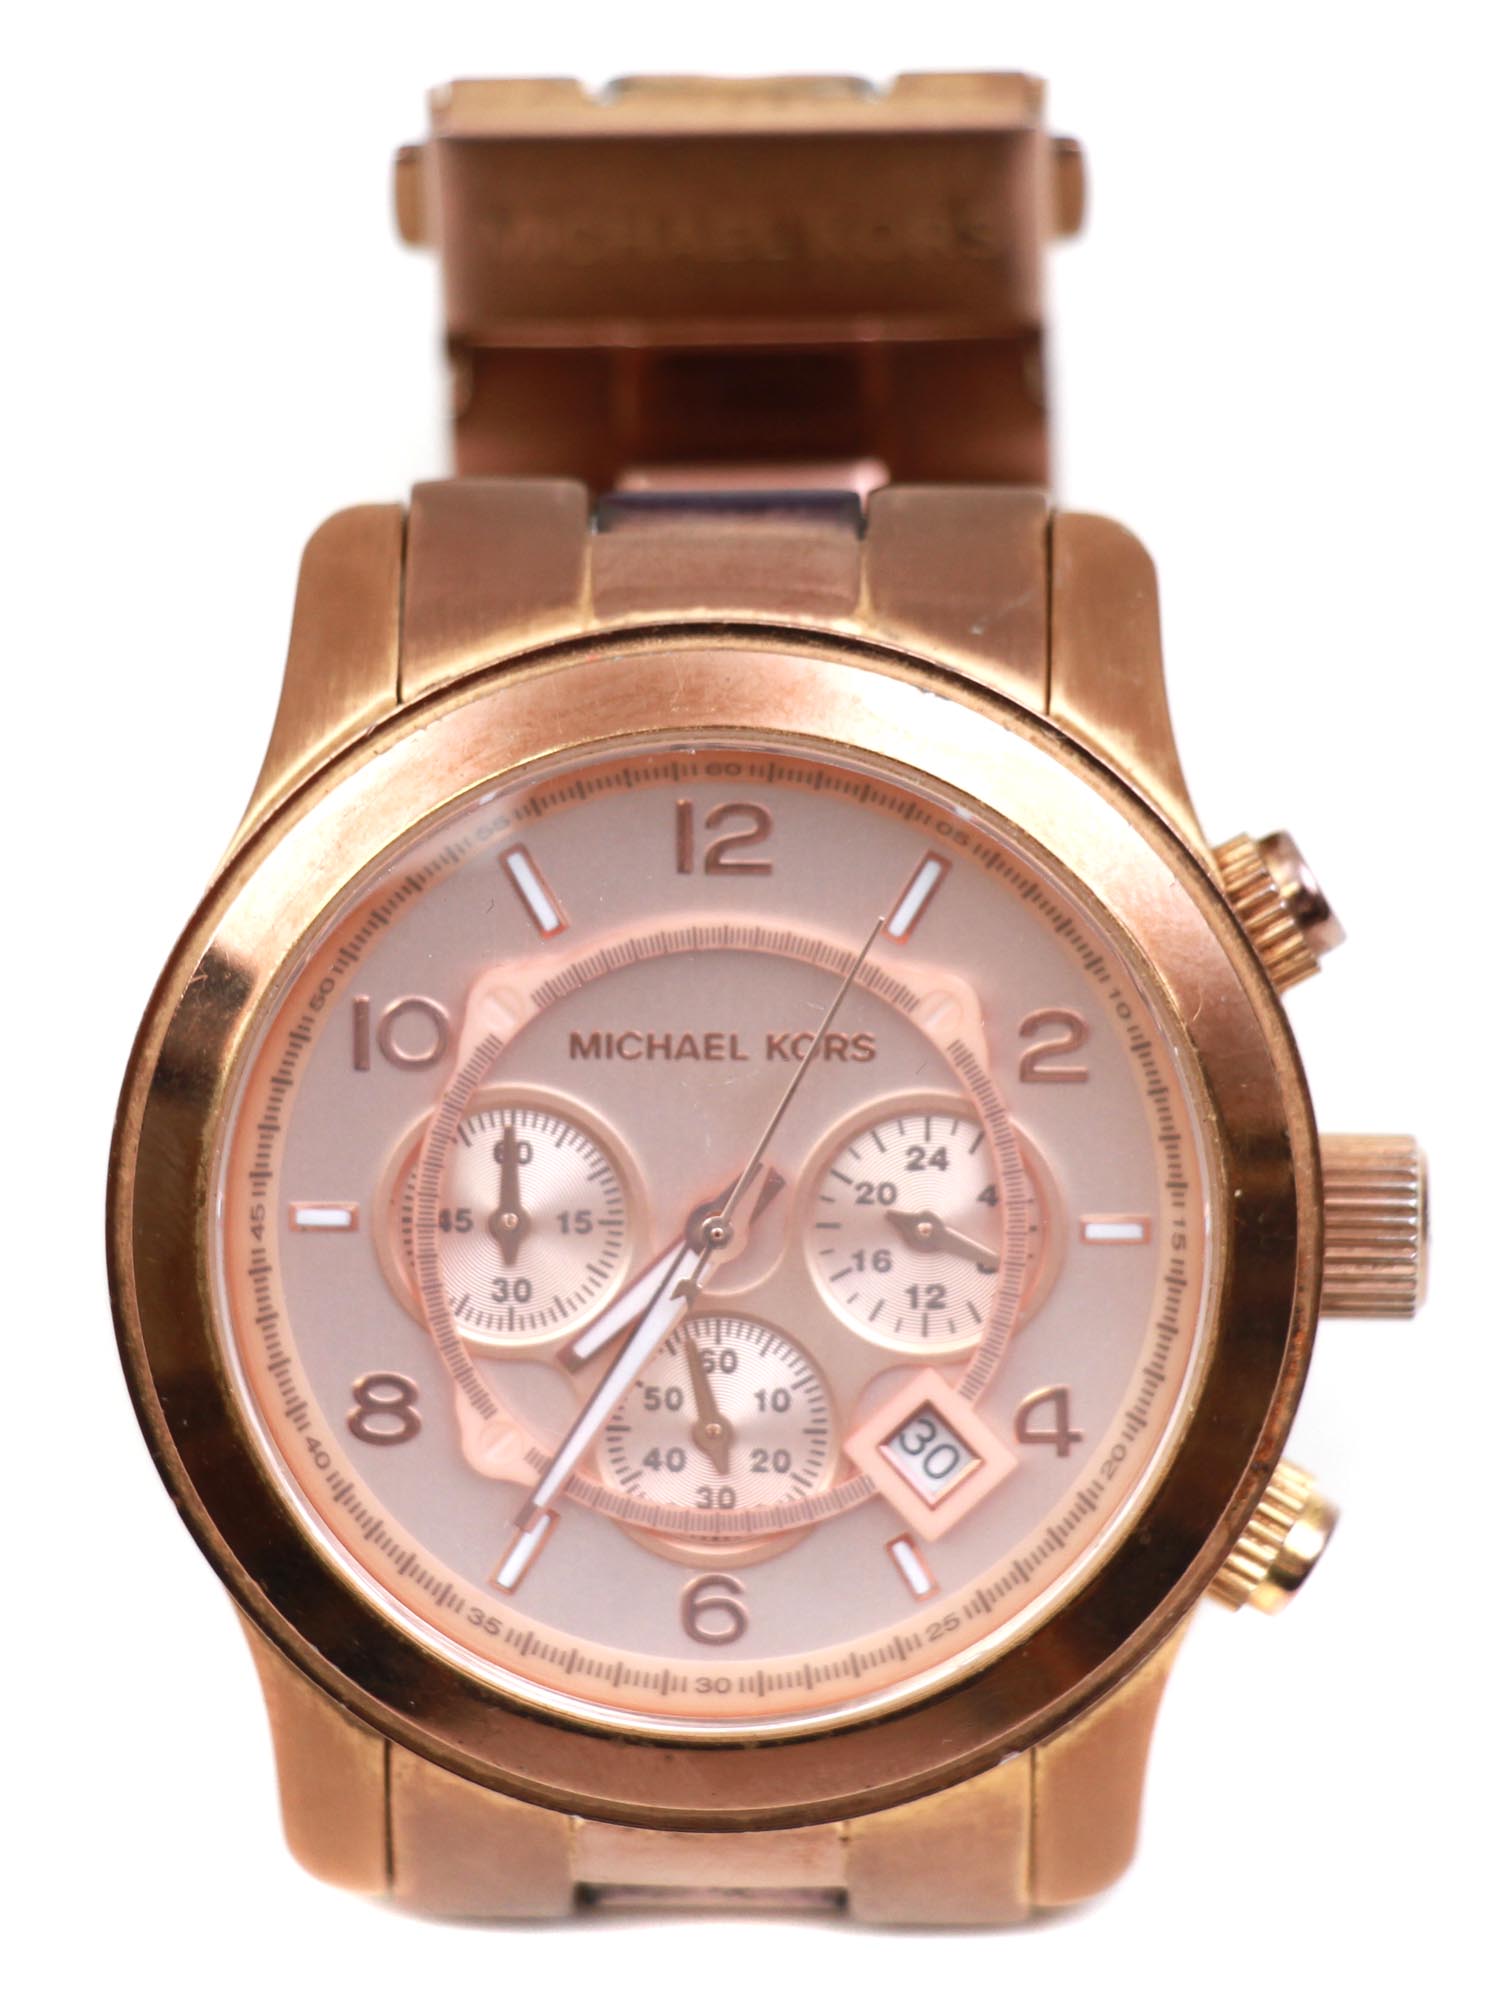 A PAIR OF CARTIER AND MICHAEL KORS WRIST WATCHES PIC-5